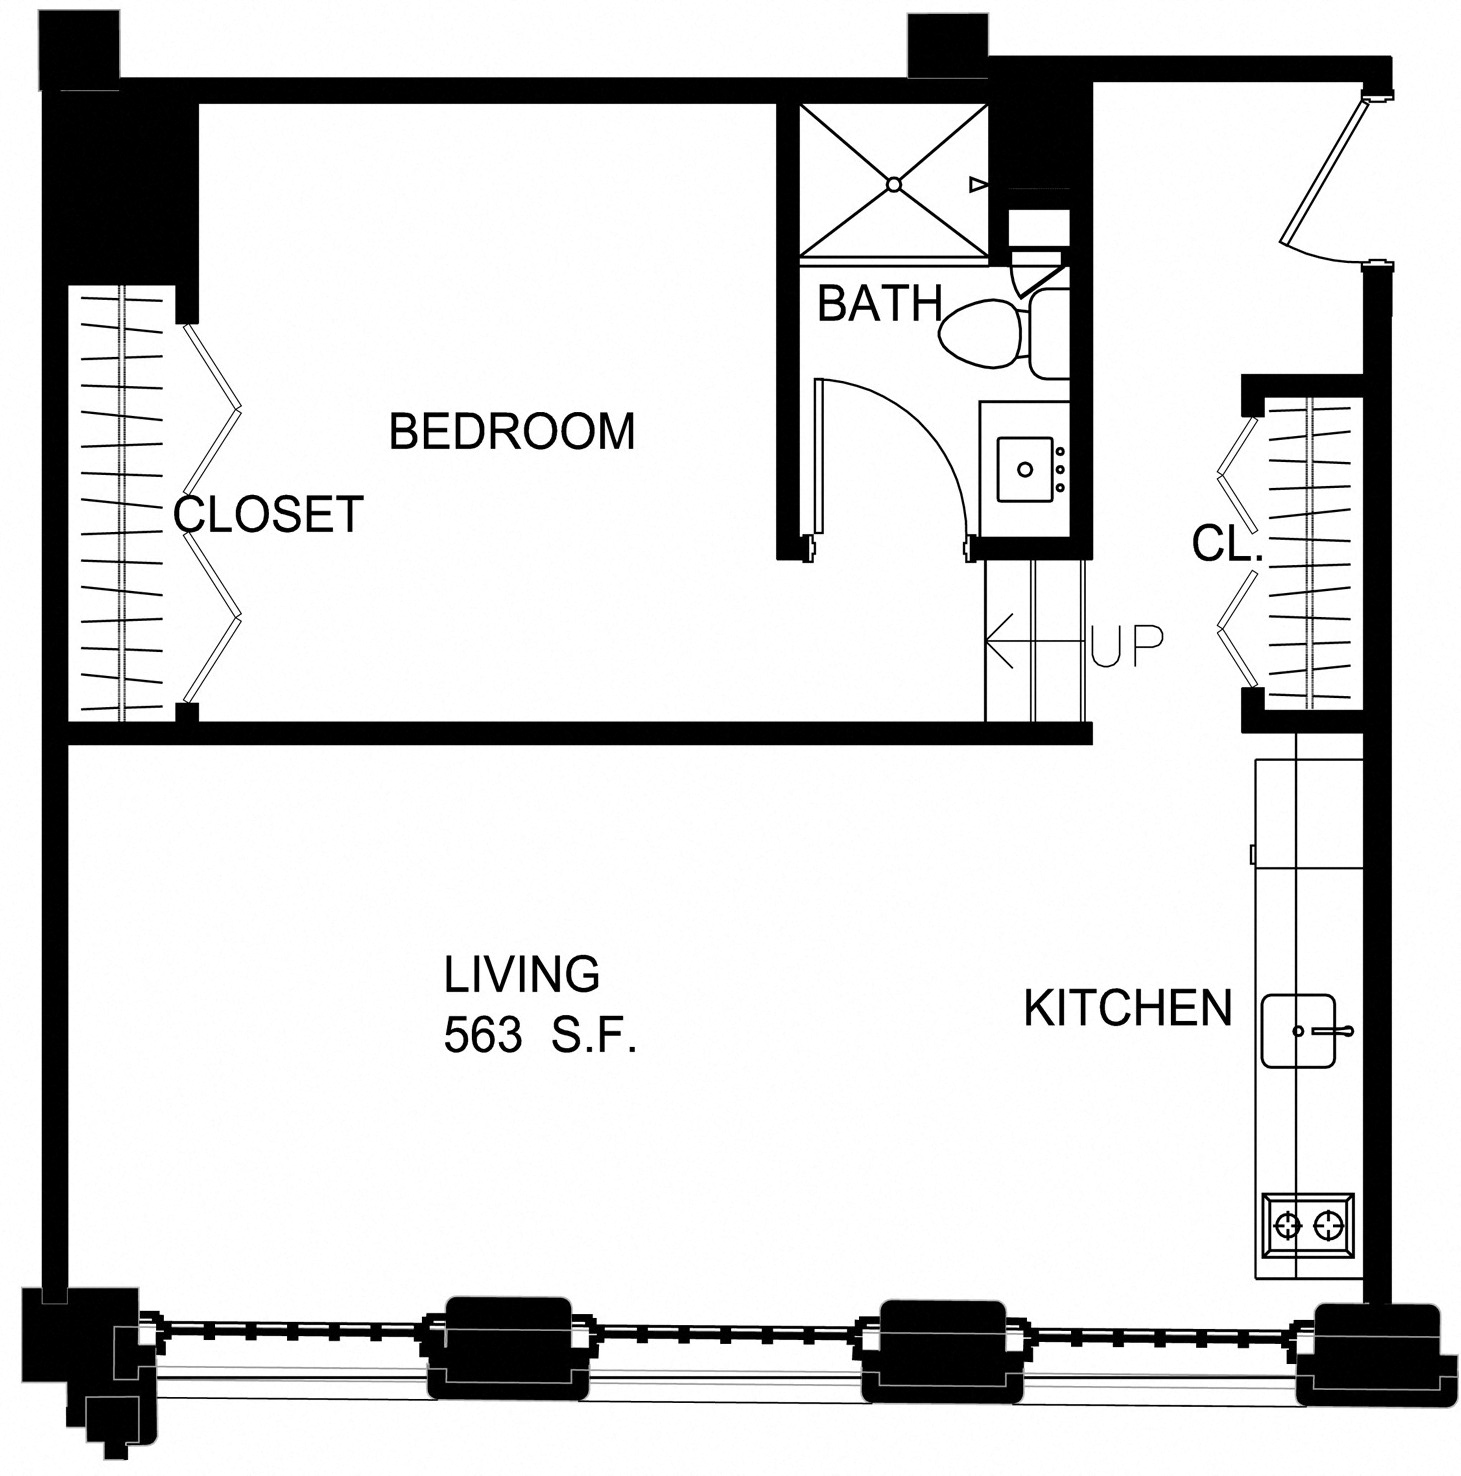 Floorplan for Apartment #S2123, 0 bedroom unit at Halstead Providence